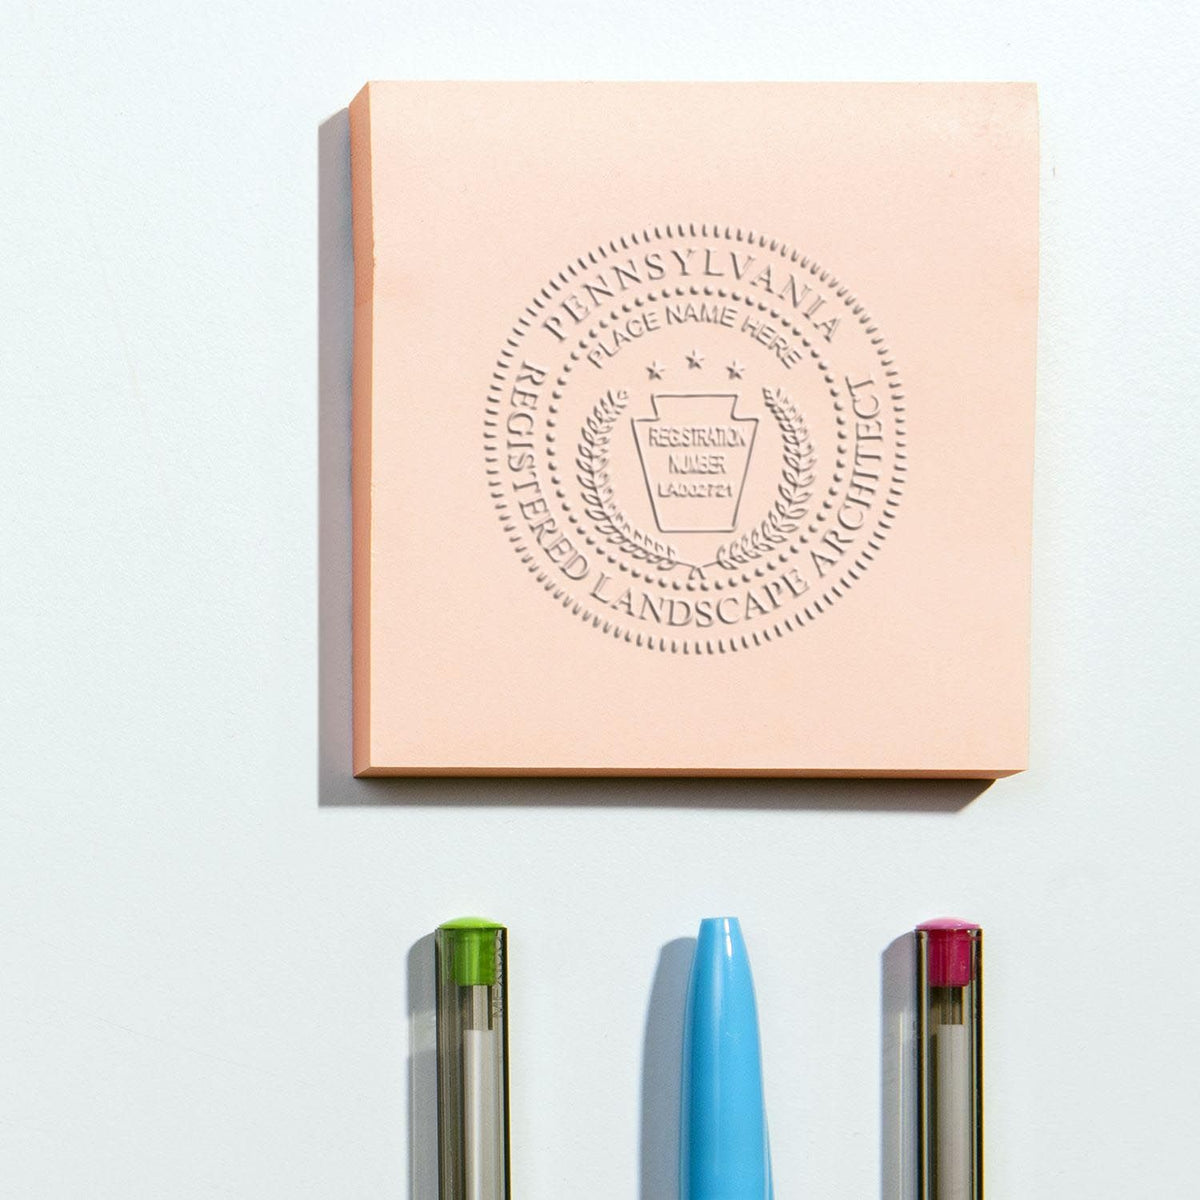 An in use photo of the Gift Pennsylvania Landscape Architect Seal showing a sample imprint on a cardstock